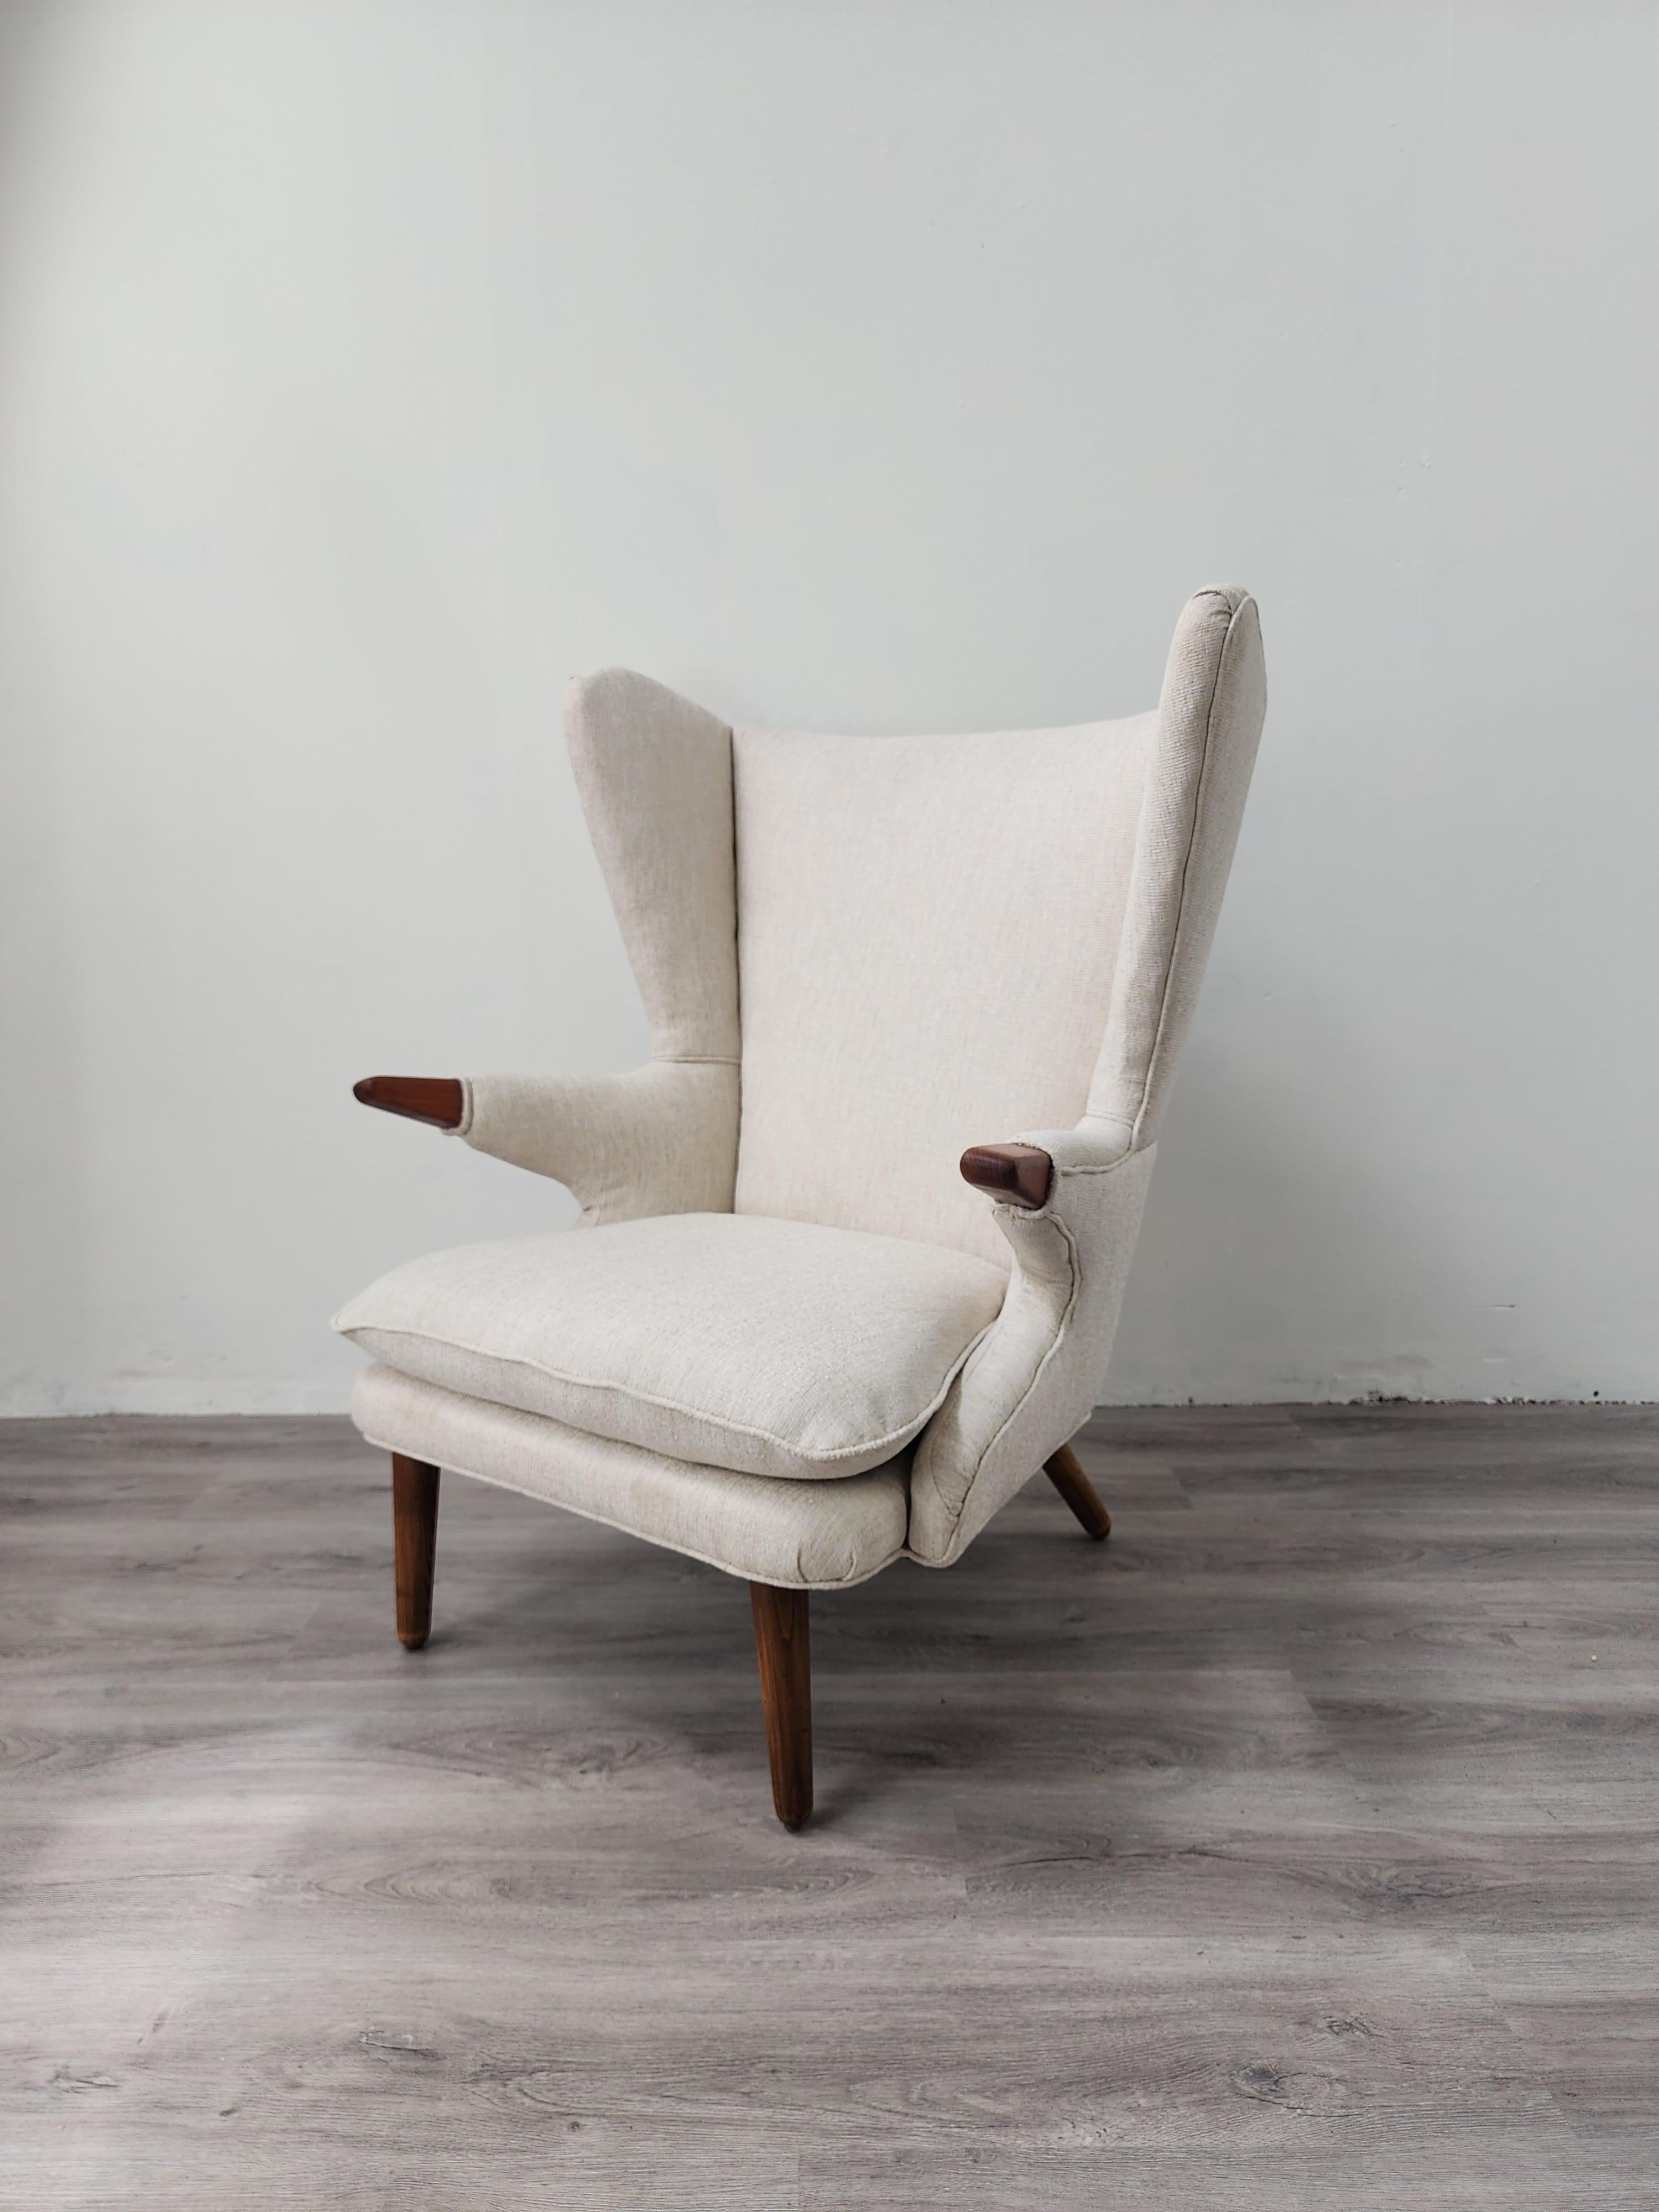 This incredible wing chair was purchased in Denmark and recently imported to the US. The iconic model 91 chair, also referred to as the Papa Bear Chair thanks to its teak 